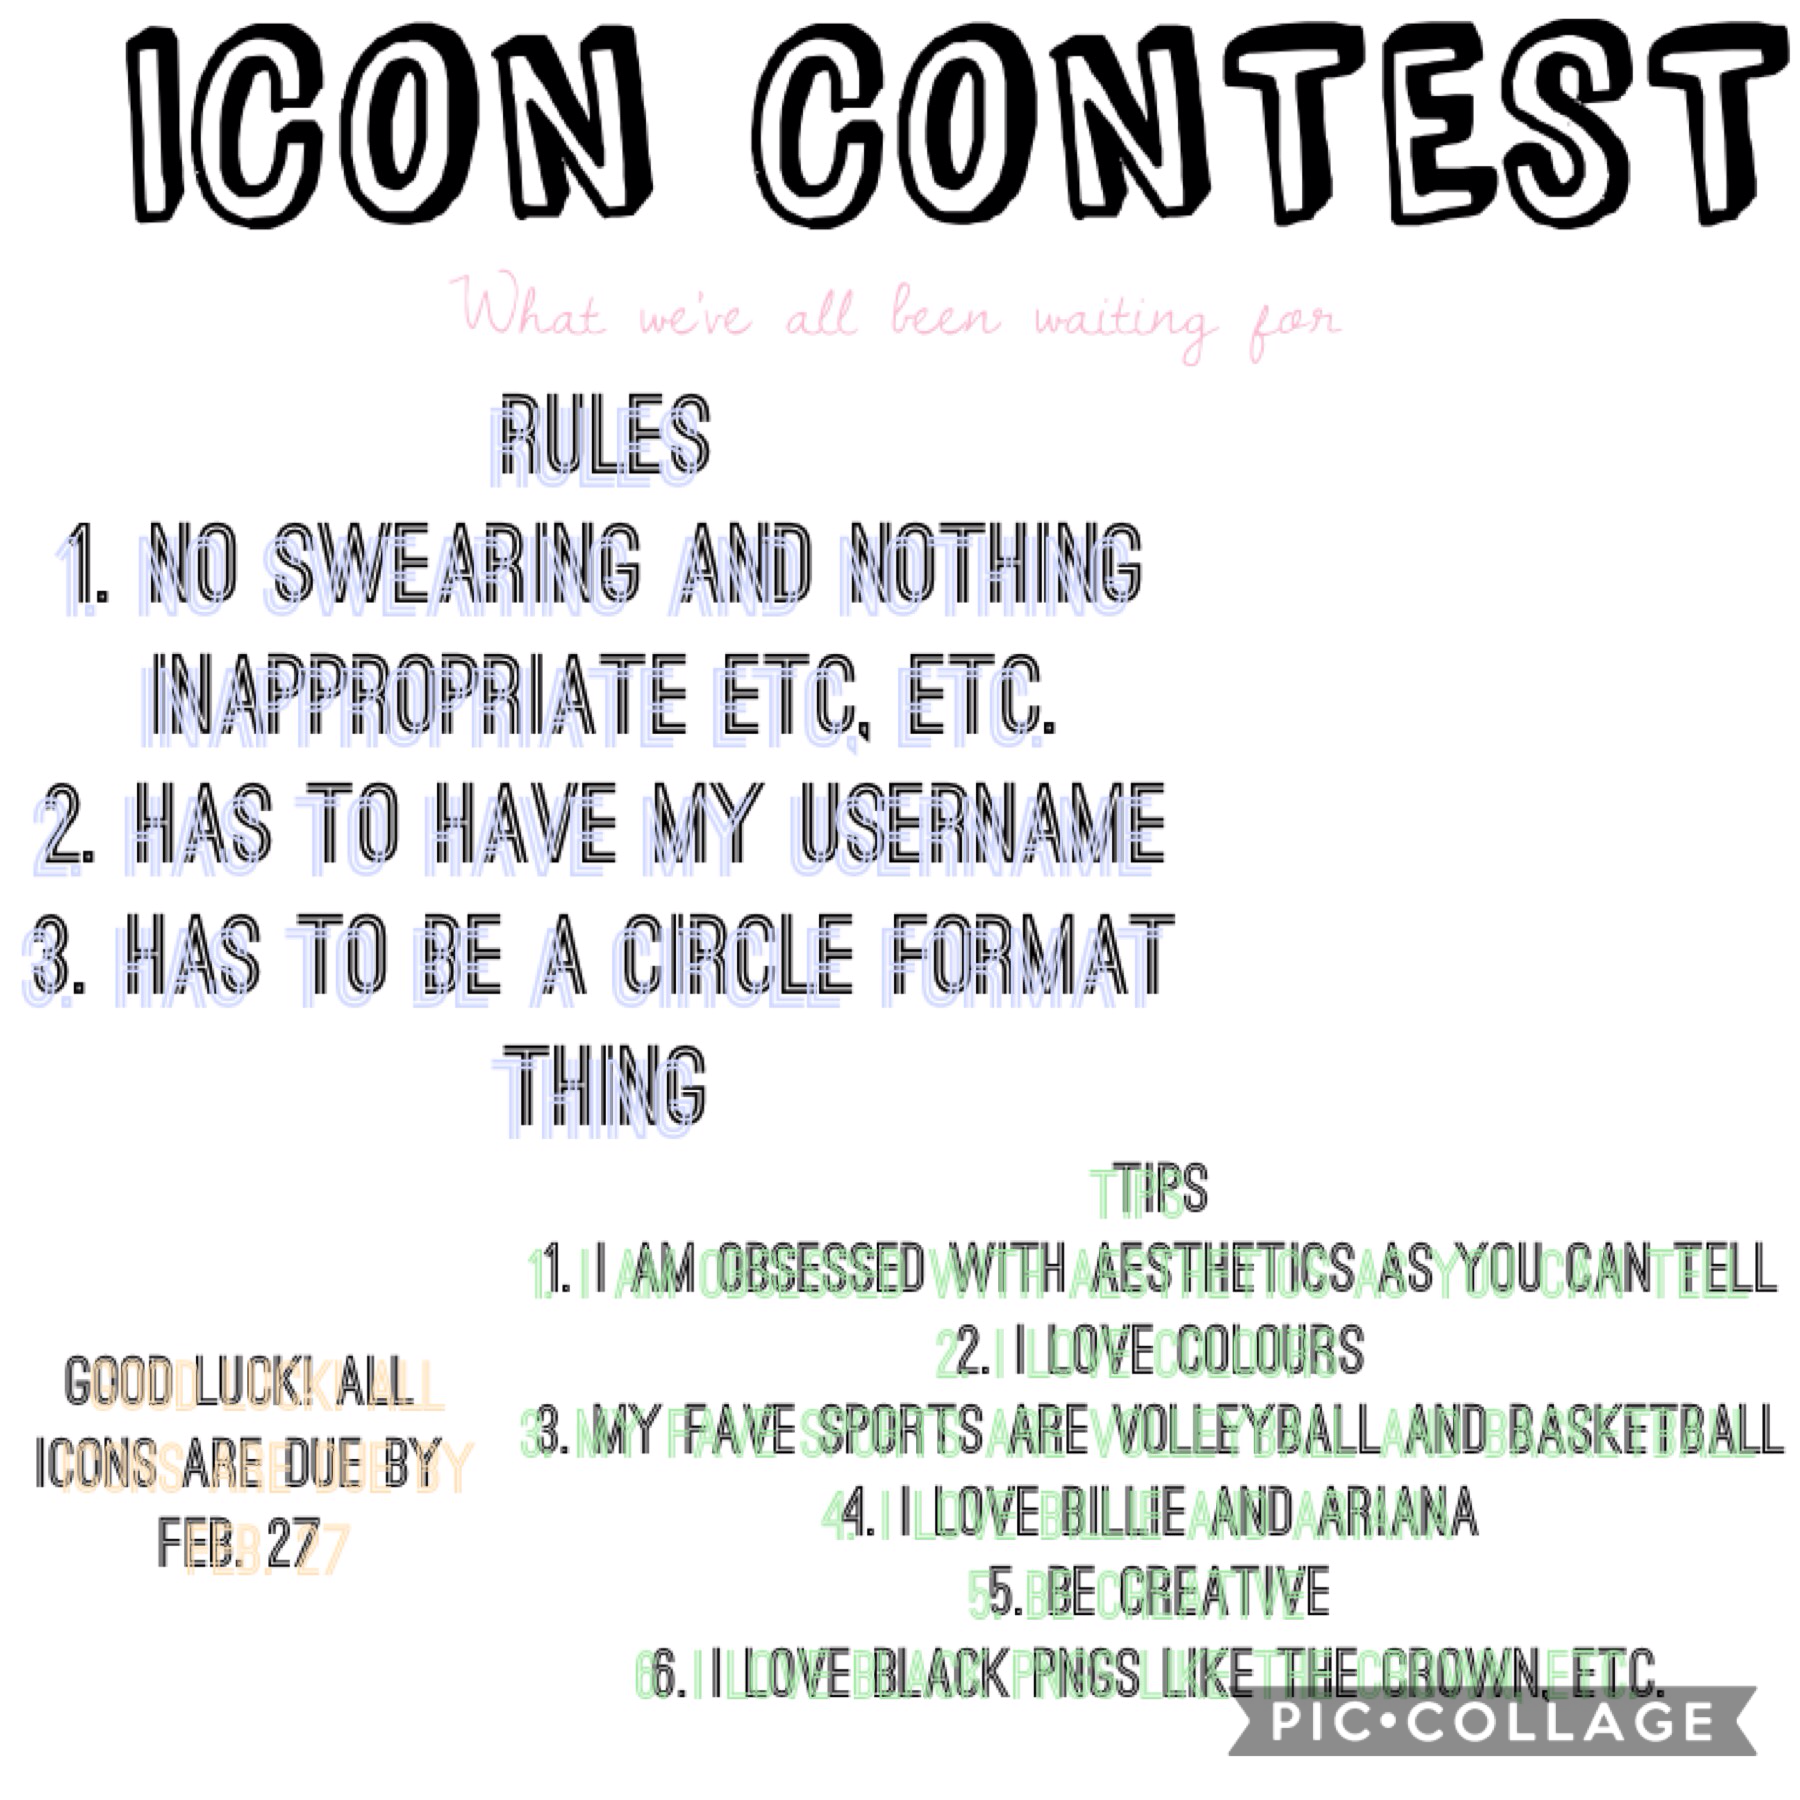 CONTEST CONTEST CONTEST!!
I'll let y'all know what the prizes are tmrw in another post
Hopefully a lot of you guys enter 
And have fun with t, I'm super excited ! 